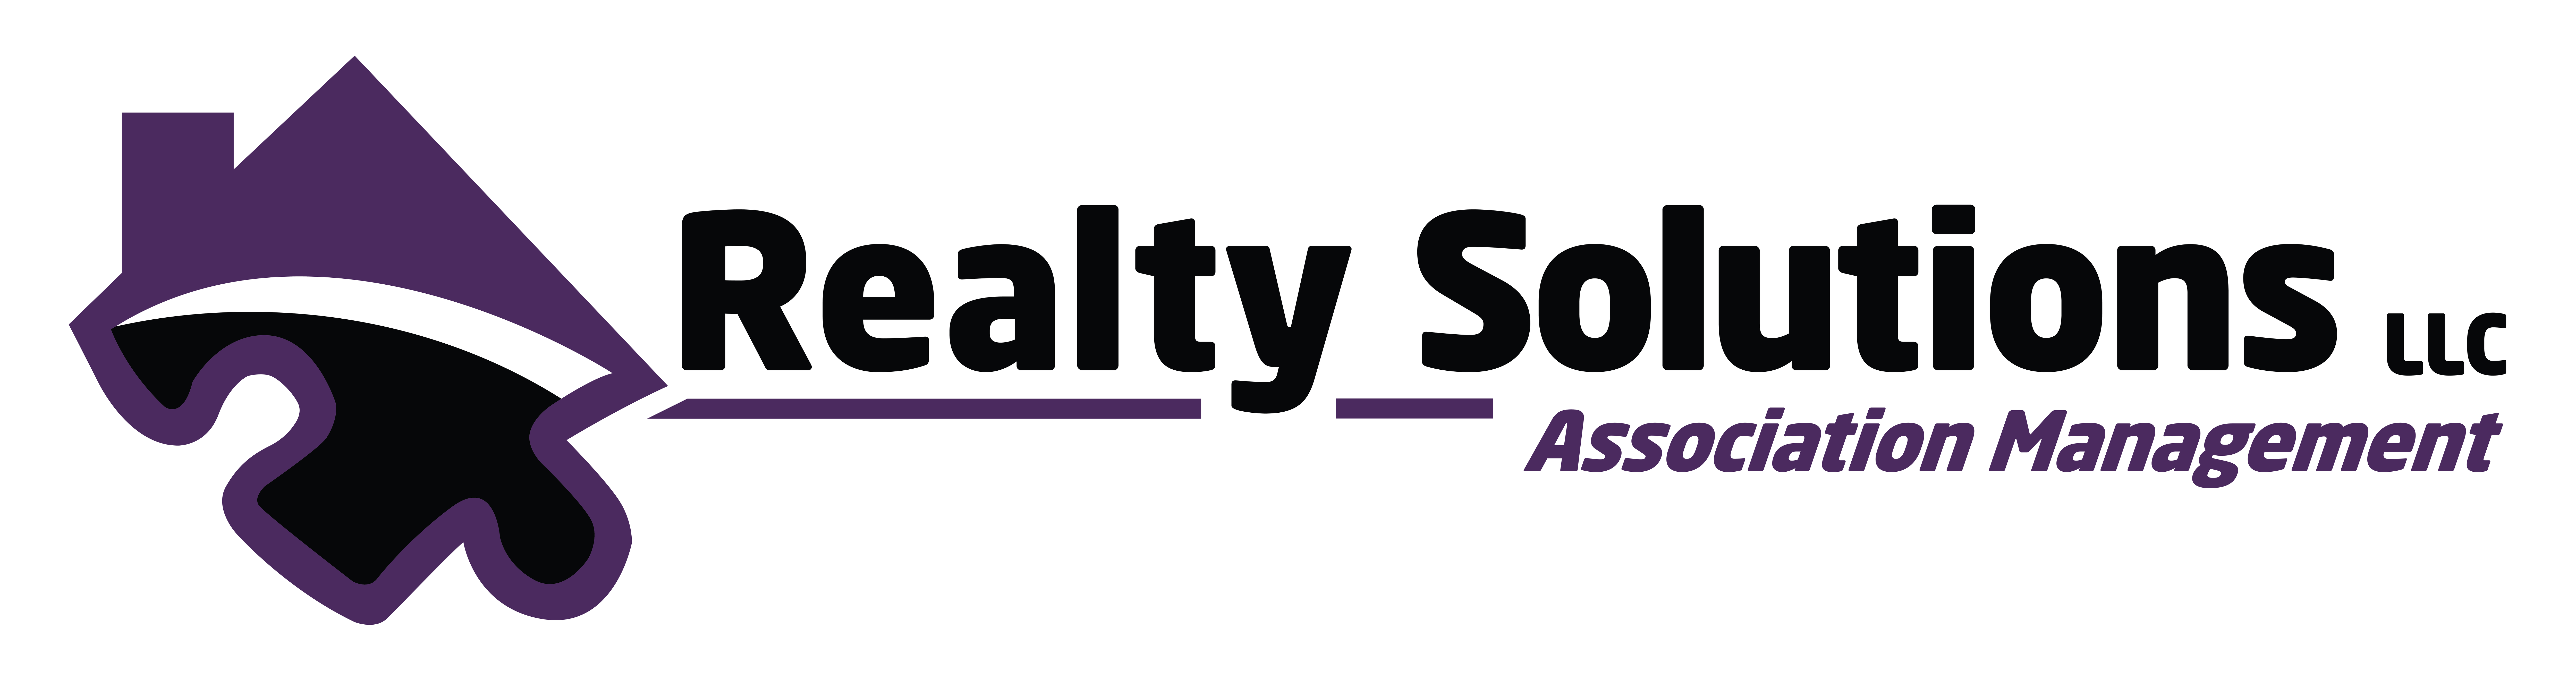 Realty Solutions - Community Management logo